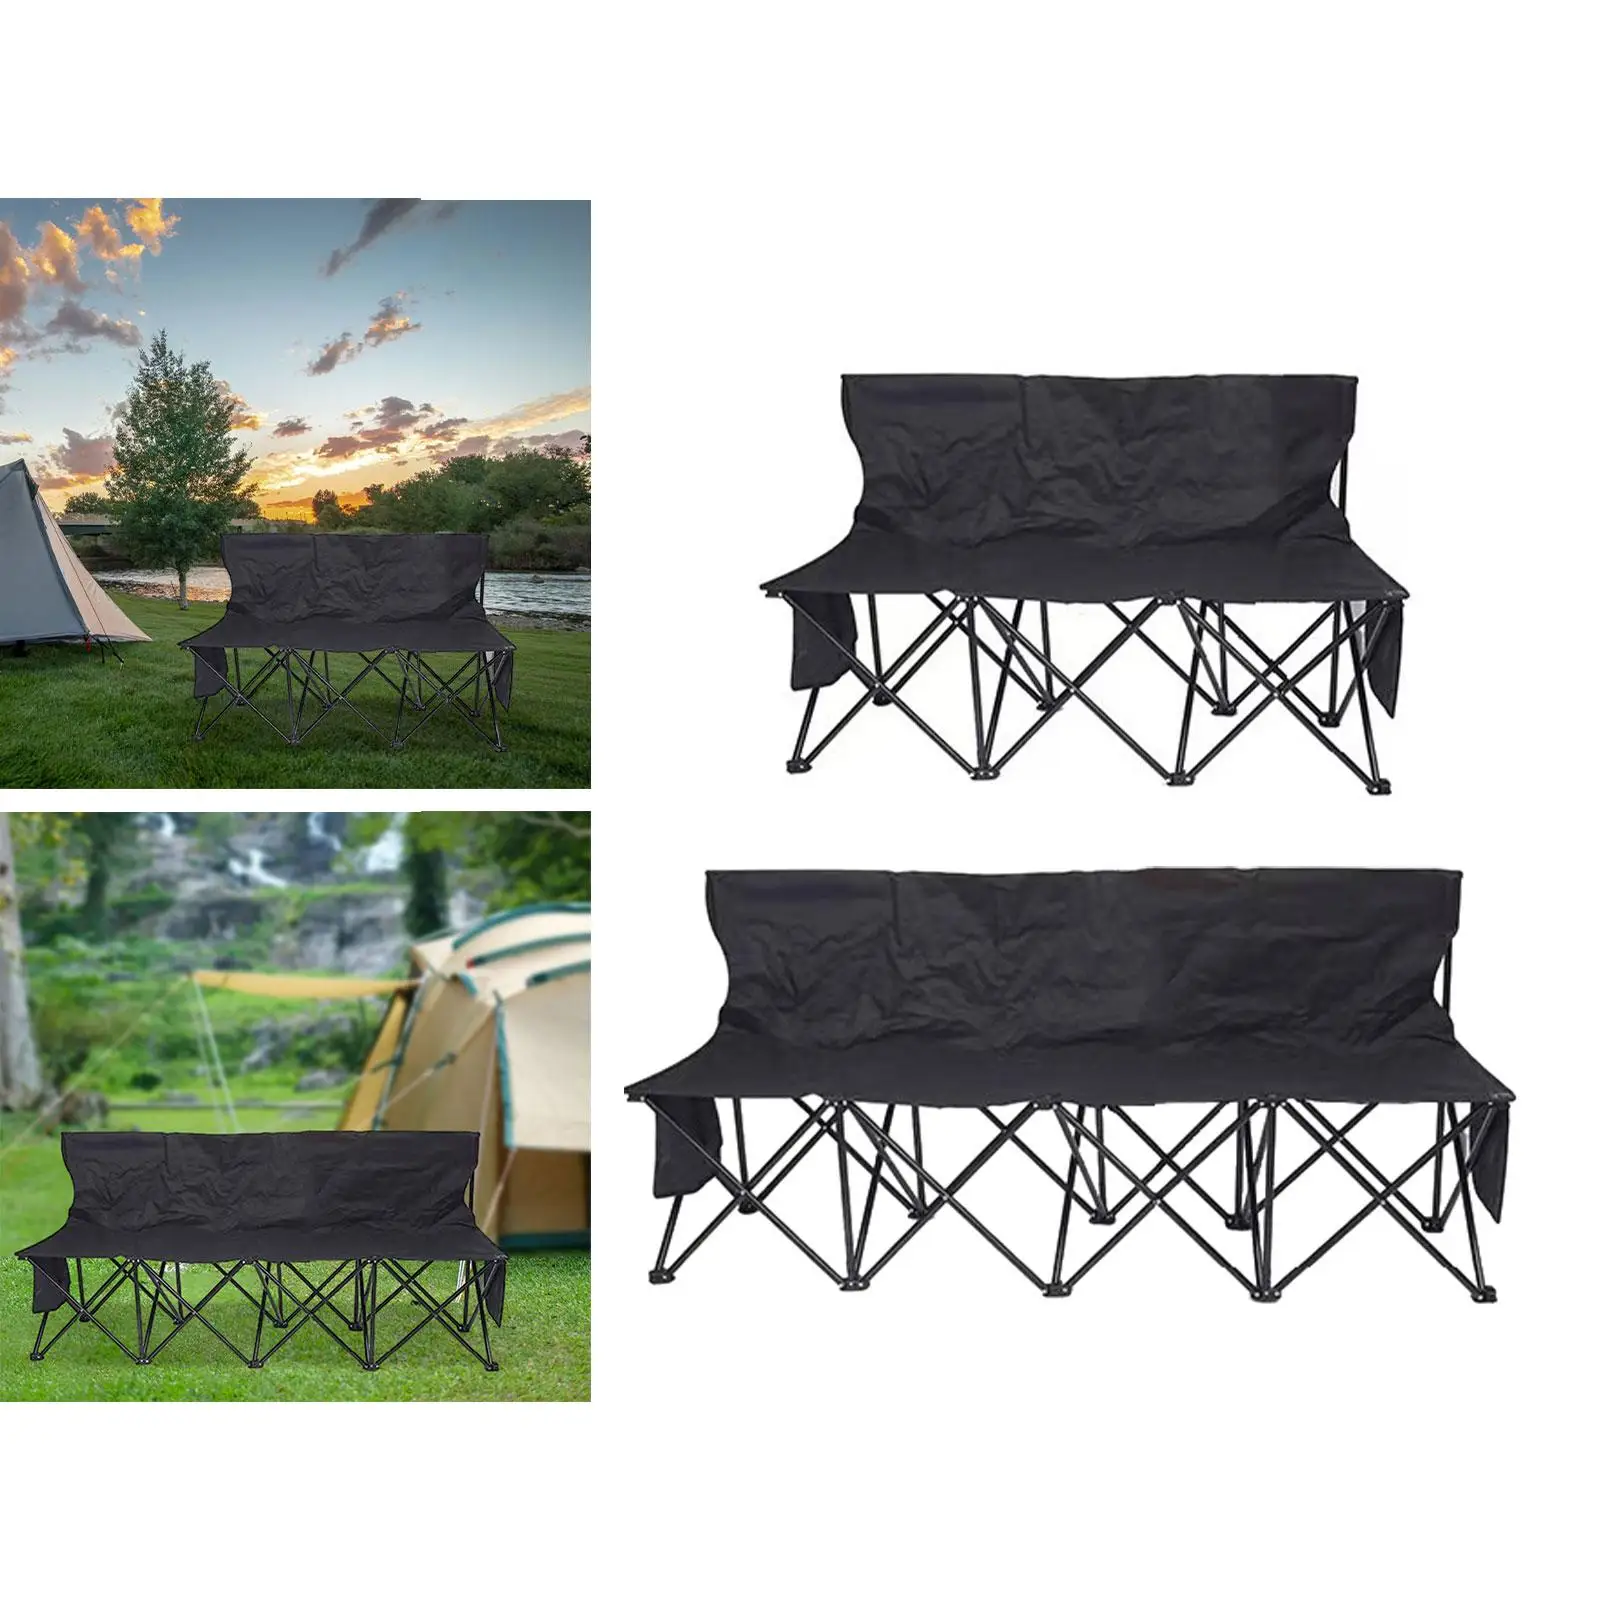 Folding Bench Lightweight with Back Oxford Cloth Steel Pipe Foldable Sideline Bench for Beach Lawn Soccer Games Sports Outside